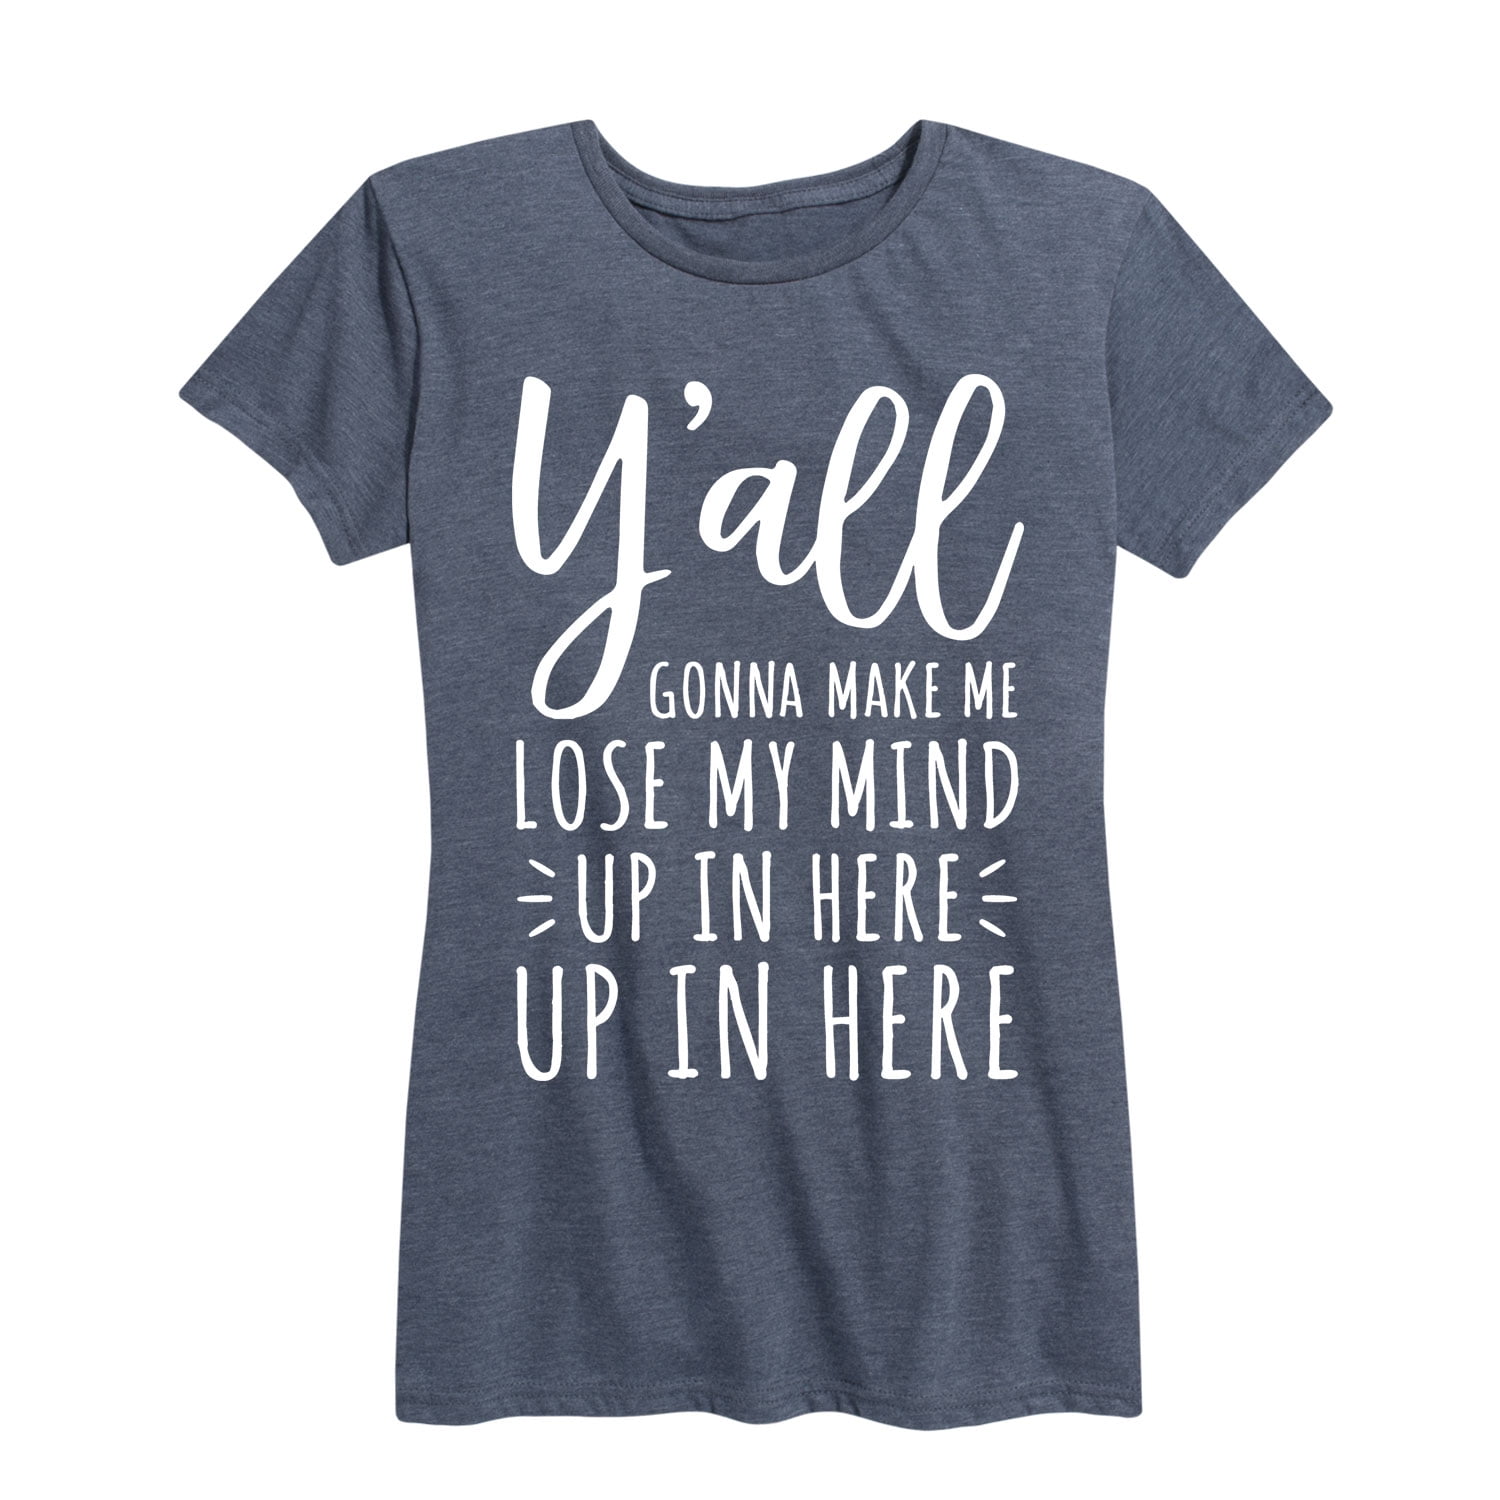 Instant Message - Yall Gonna Make Me Lose My Mind - Women's Short ...